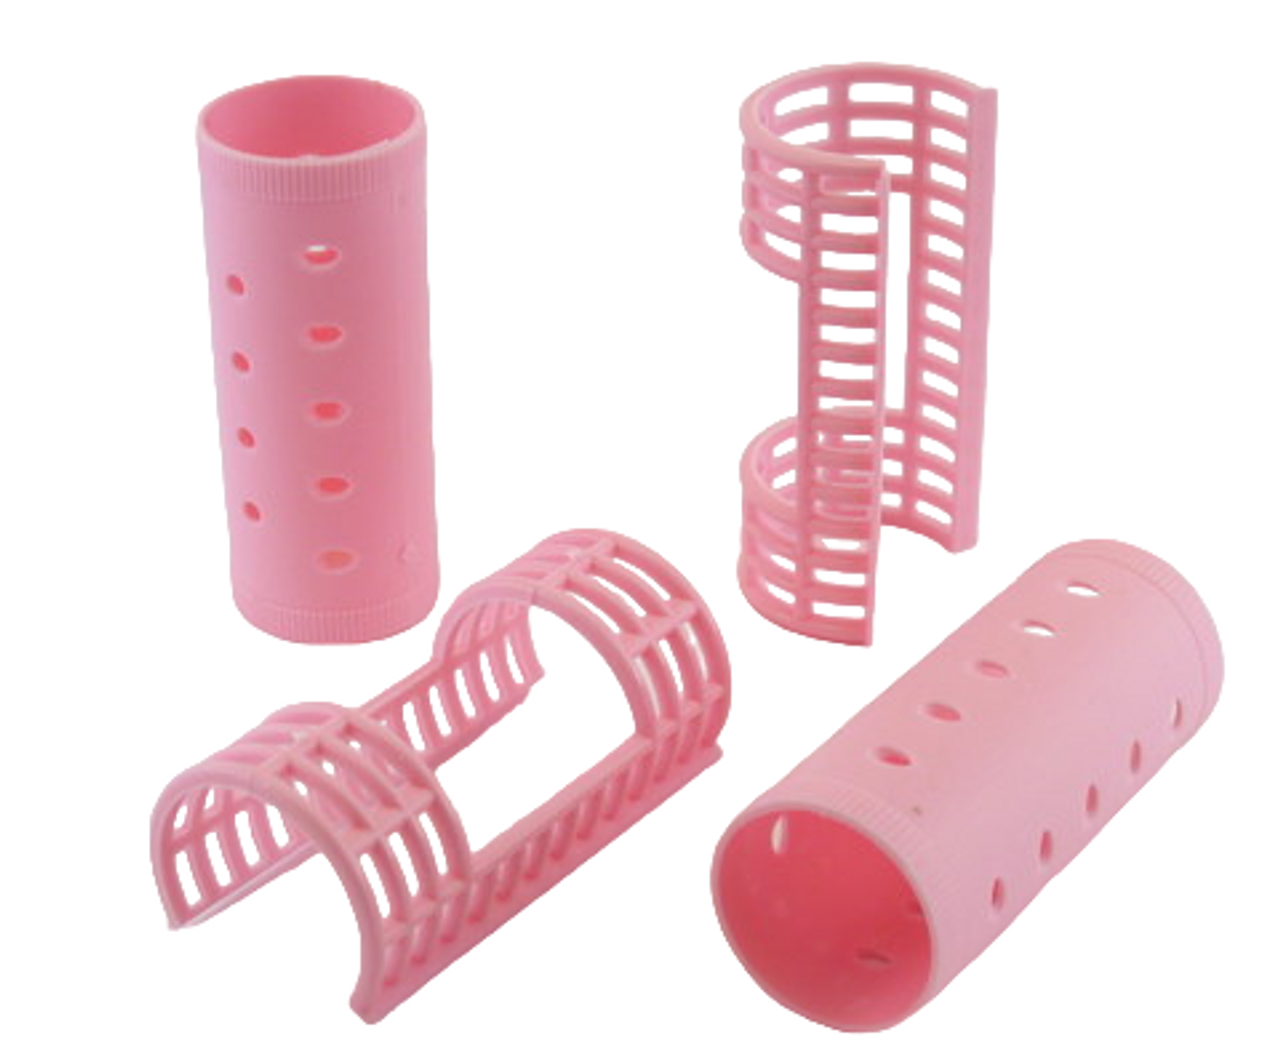 snap on plastic hair rollers